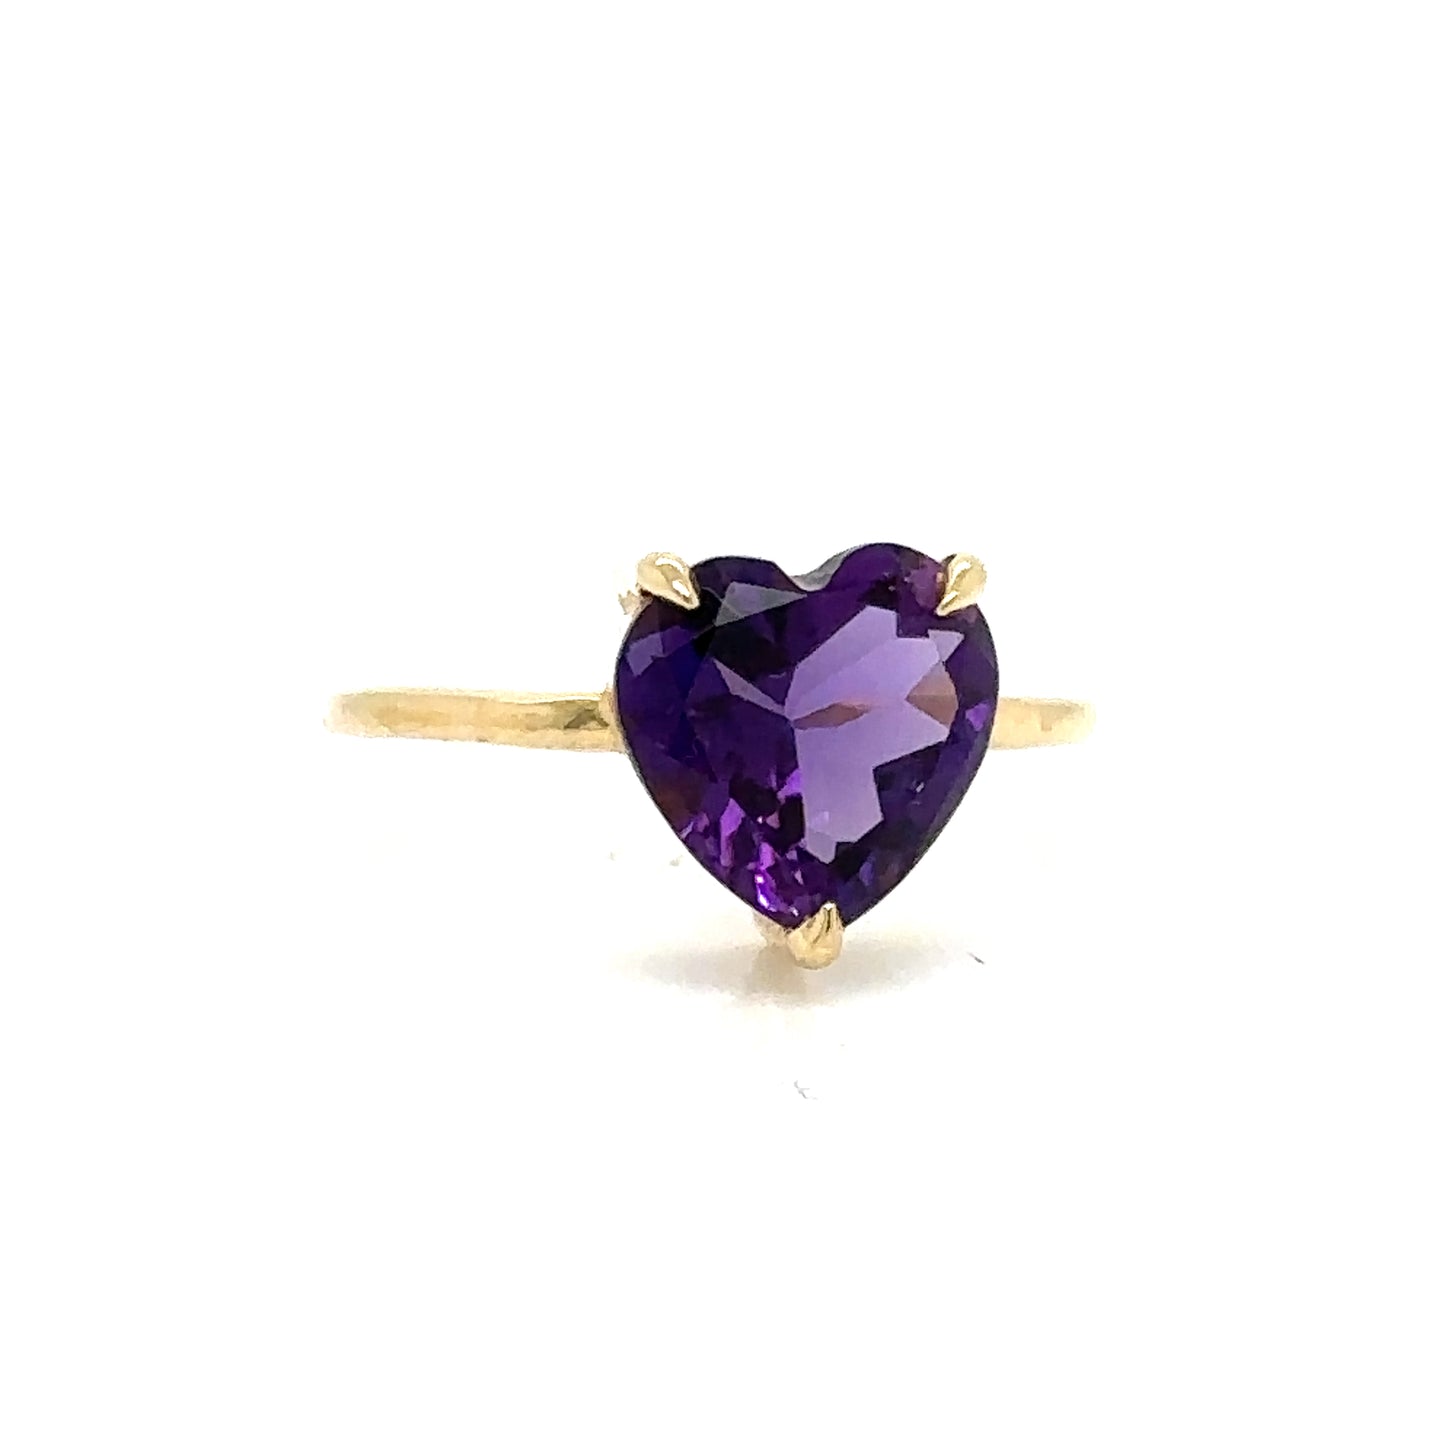 IMMEDIATE DELIVERY / Large Amethyst Heart Ring / 14k Yellow Gold / Size 7